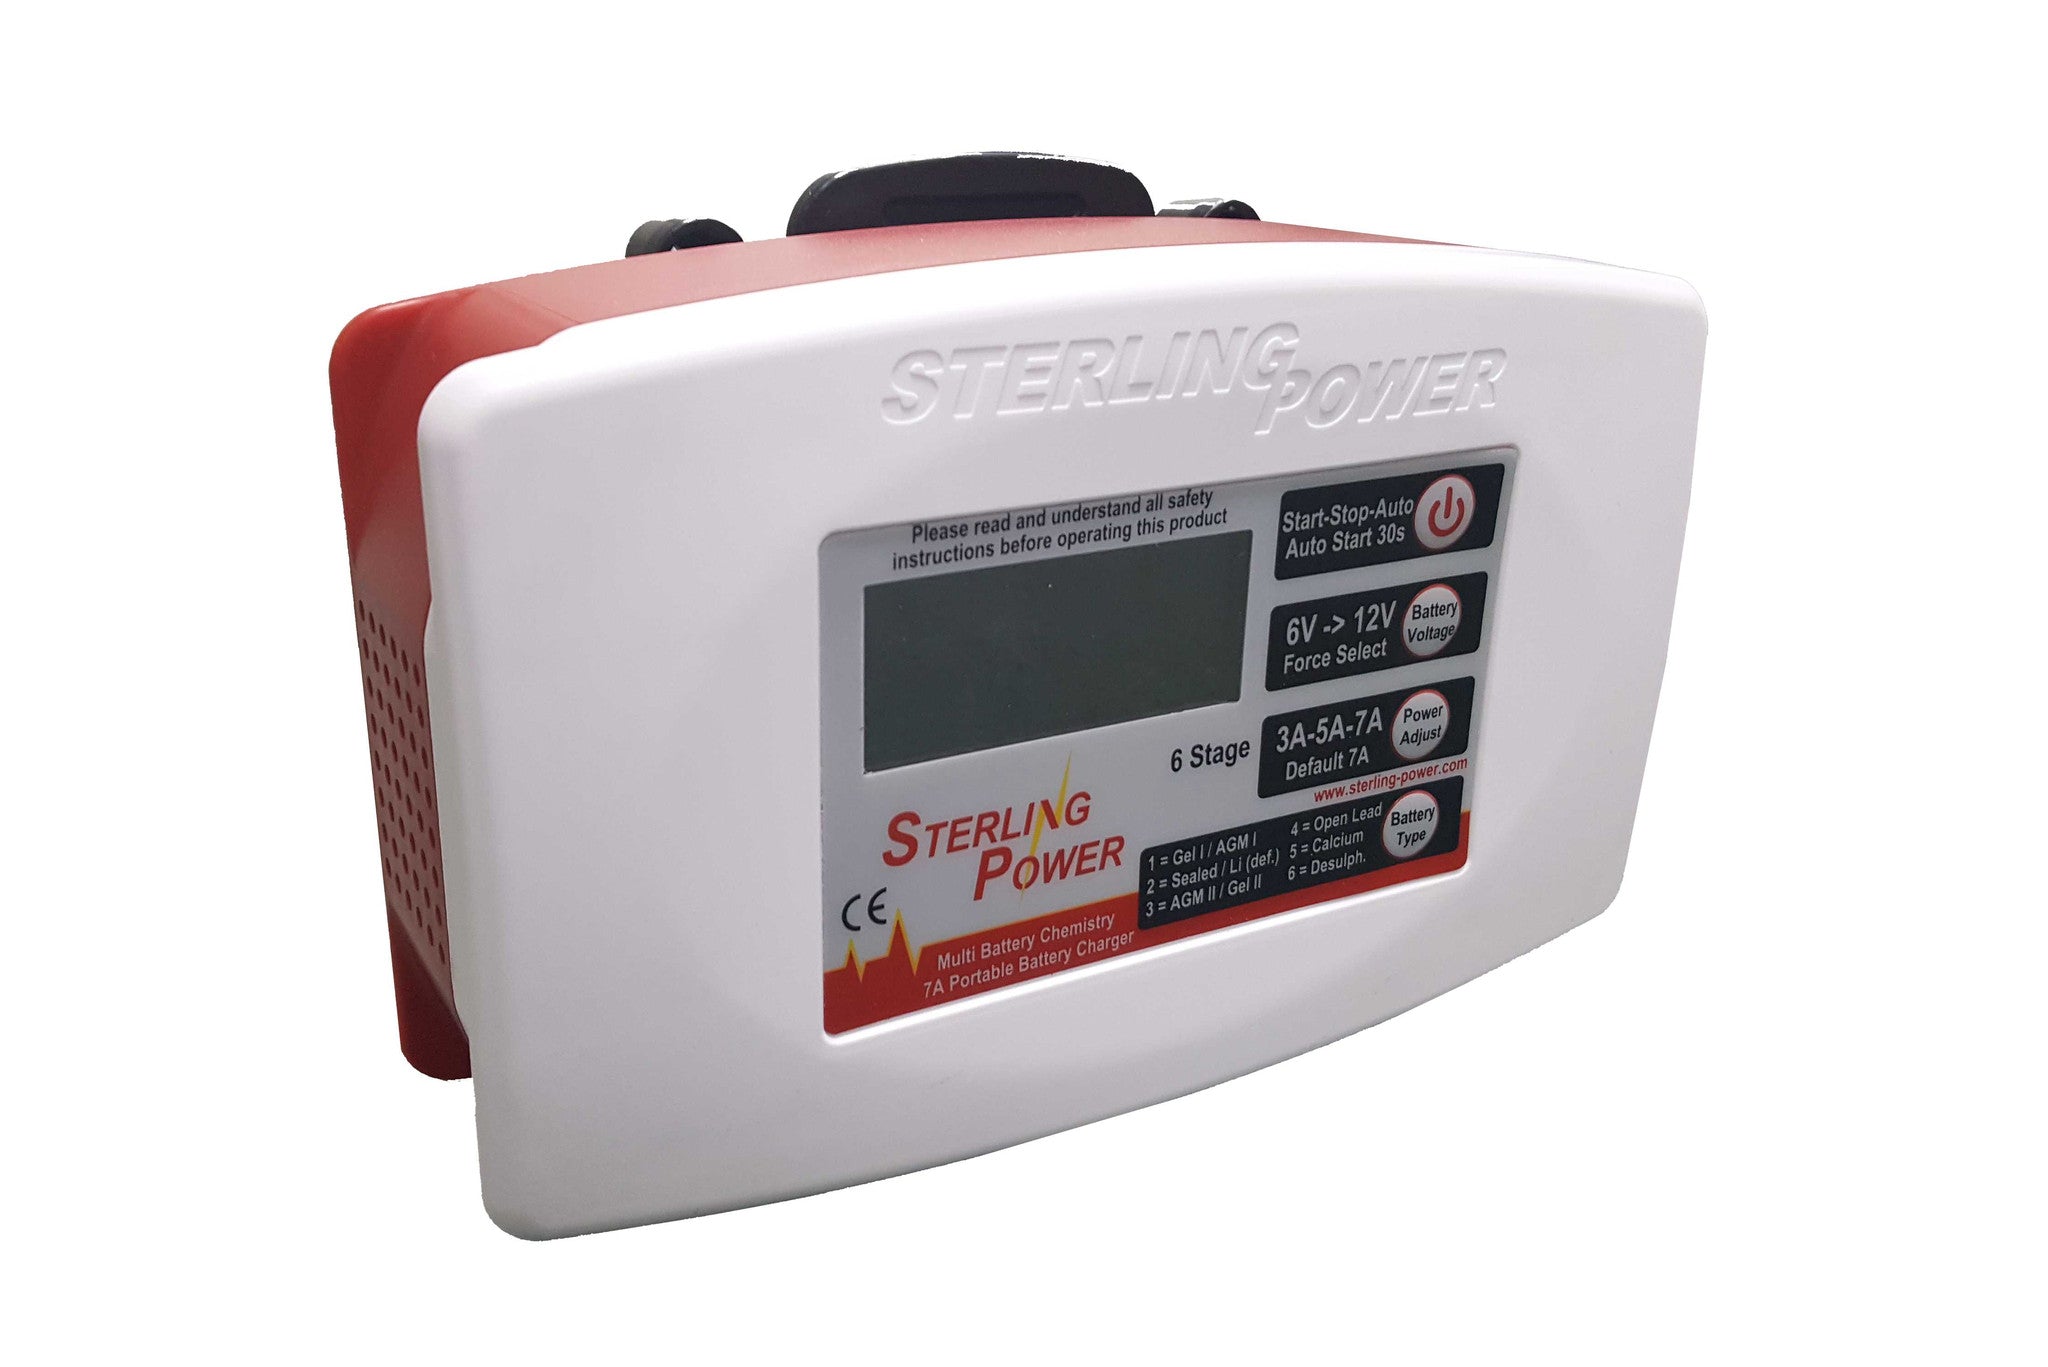 12v 20A 7 Stage Connect & Forget Automatic Smart Battery Charger with UK  Plug